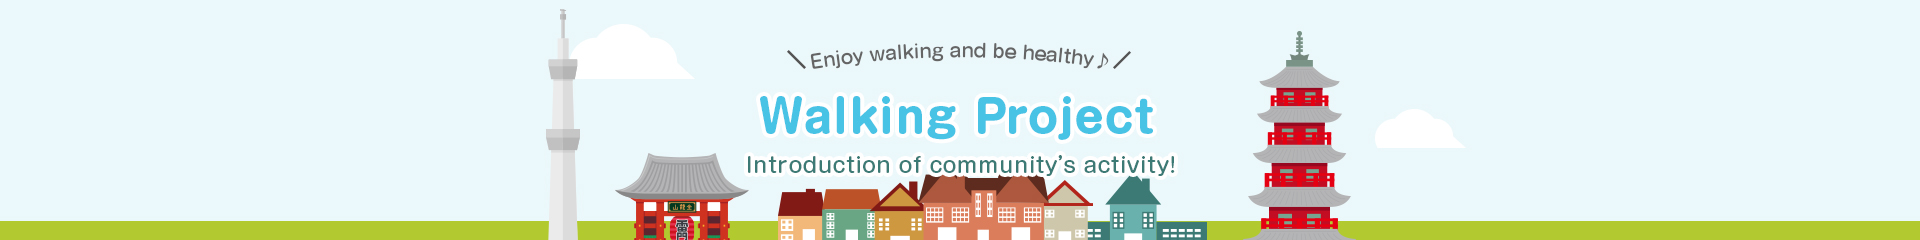 【Sumida City】Walking Related Projects